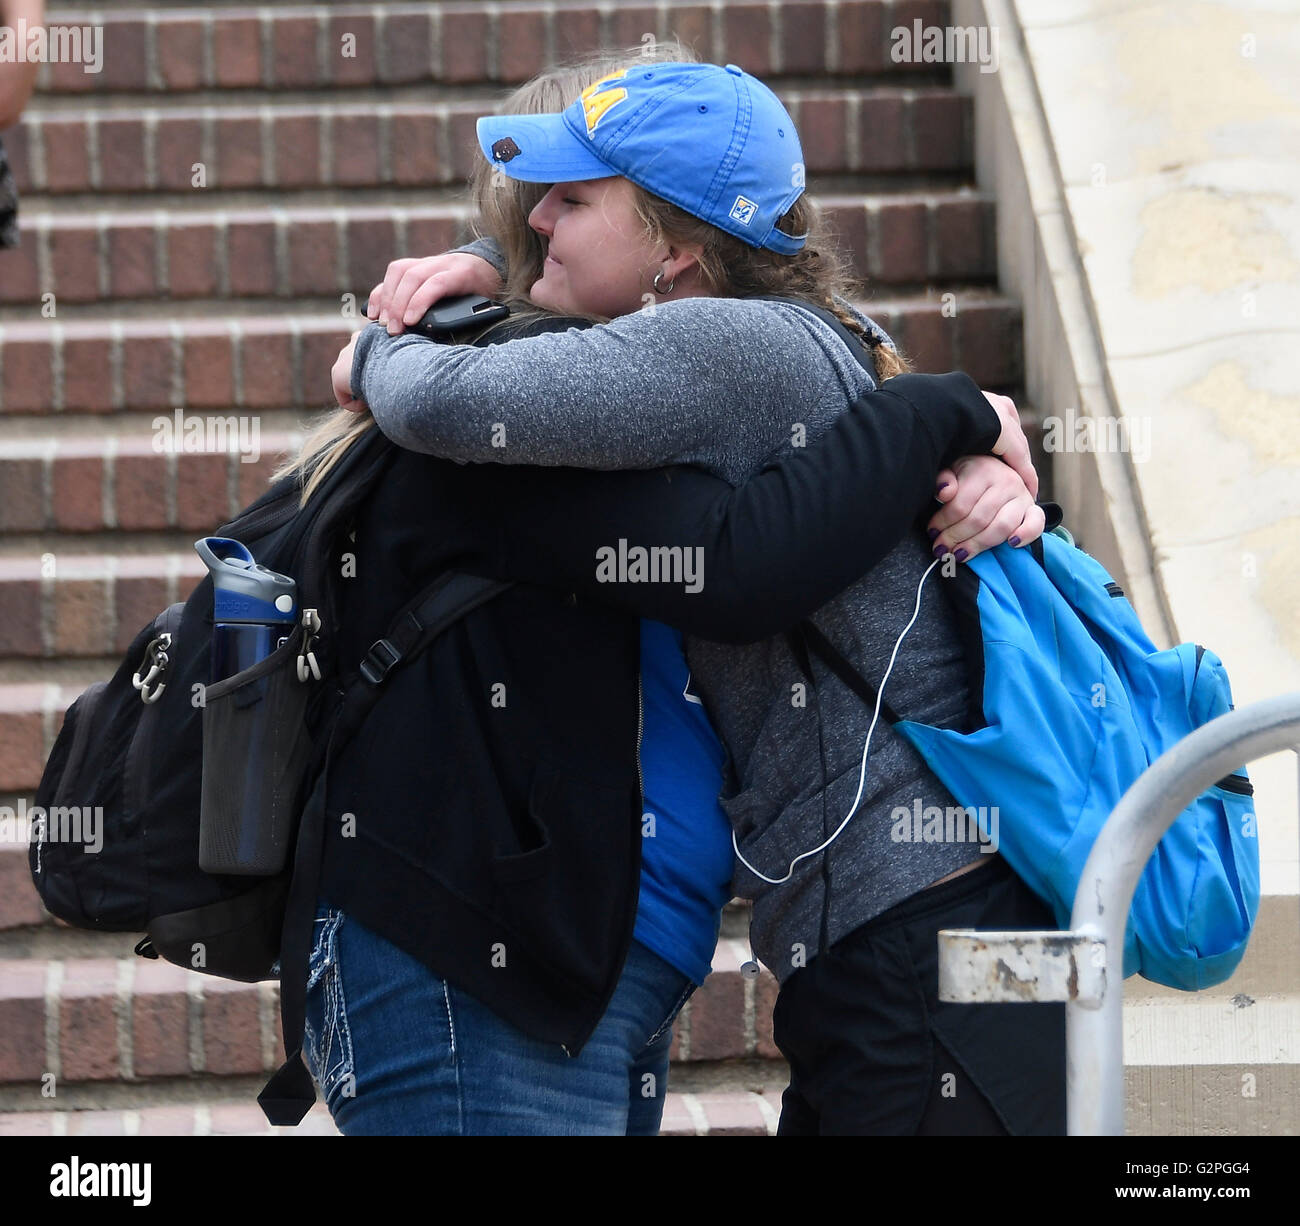 June 1, 2016. Westwood CA. Friends hug each other as they make their way out of class rooms after the lockdown was lifted. Today at UCLA after a murder-suicide Wednesday morning at UCLA left two dead, and prompted a campus-wide lockdown, according to the Los Angeles Police Department.'At about 10 this morning, a homicide and a suicide occurred on the southside, ' Los Angeles Police Chief Charlie Beck said in a news conference. 'It appears it was entirely contained. We believe there are no suspects outstanding and no continued threat to UCLA campus. We're in the process of releasing the ca Stock Photo